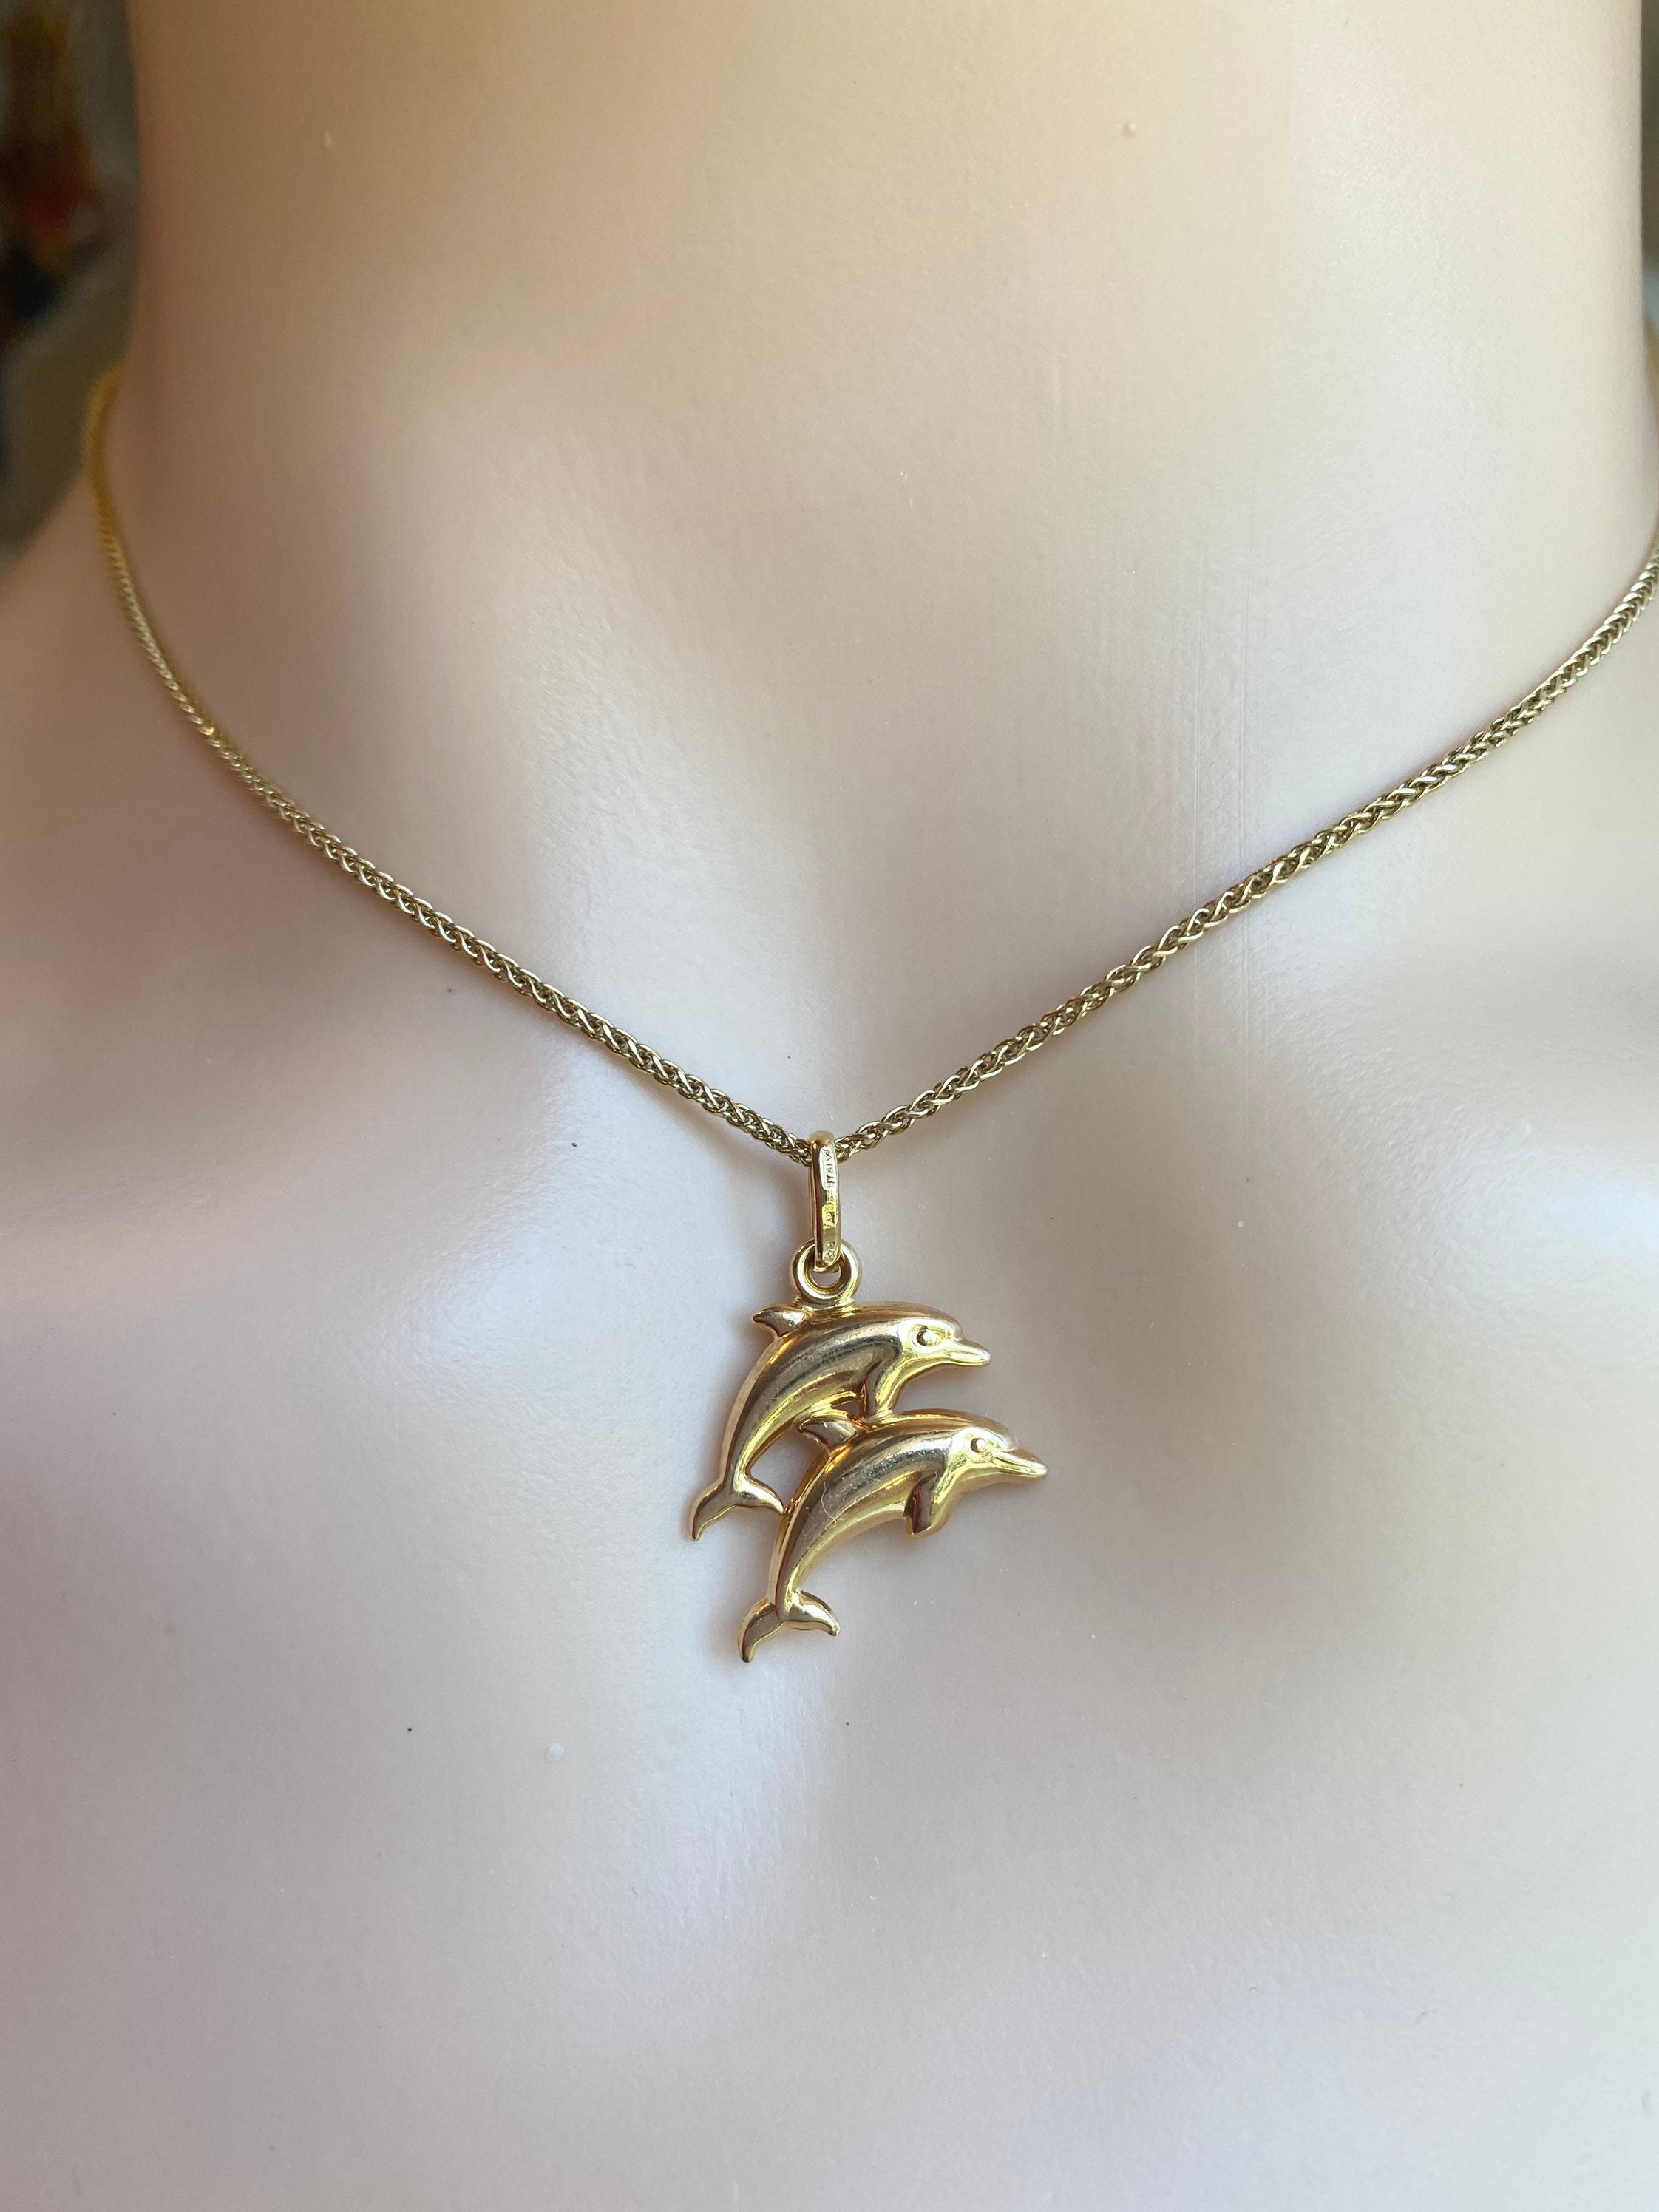 Wave Riding Dolphin Necklace